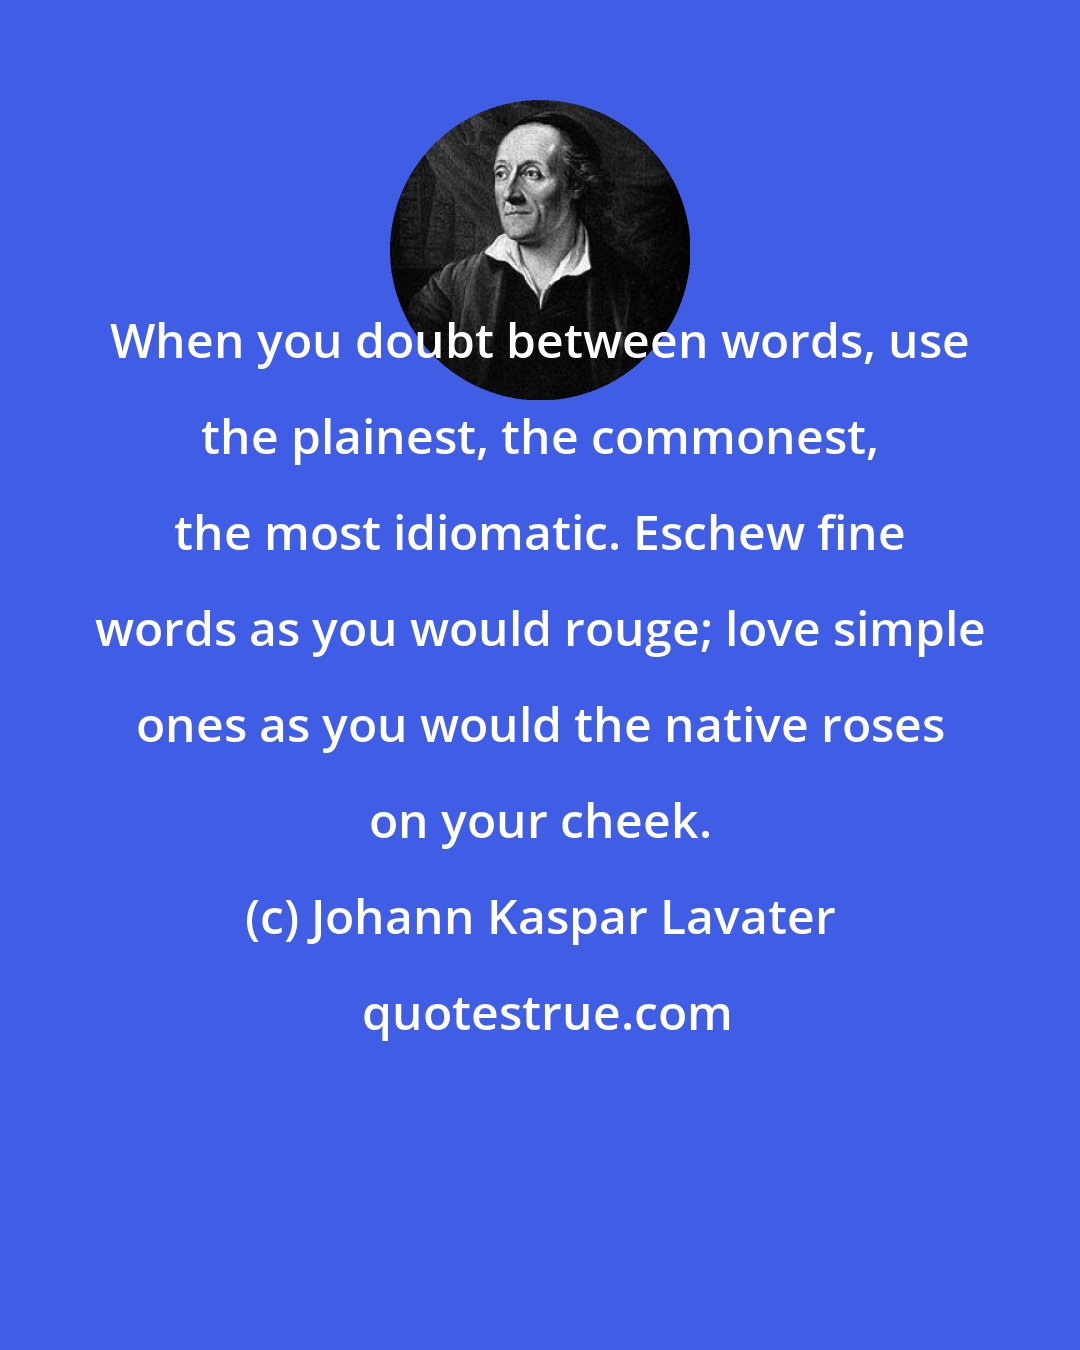 Johann Kaspar Lavater: When you doubt between words, use the plainest, the commonest, the most idiomatic. Eschew fine words as you would rouge; love simple ones as you would the native roses on your cheek.